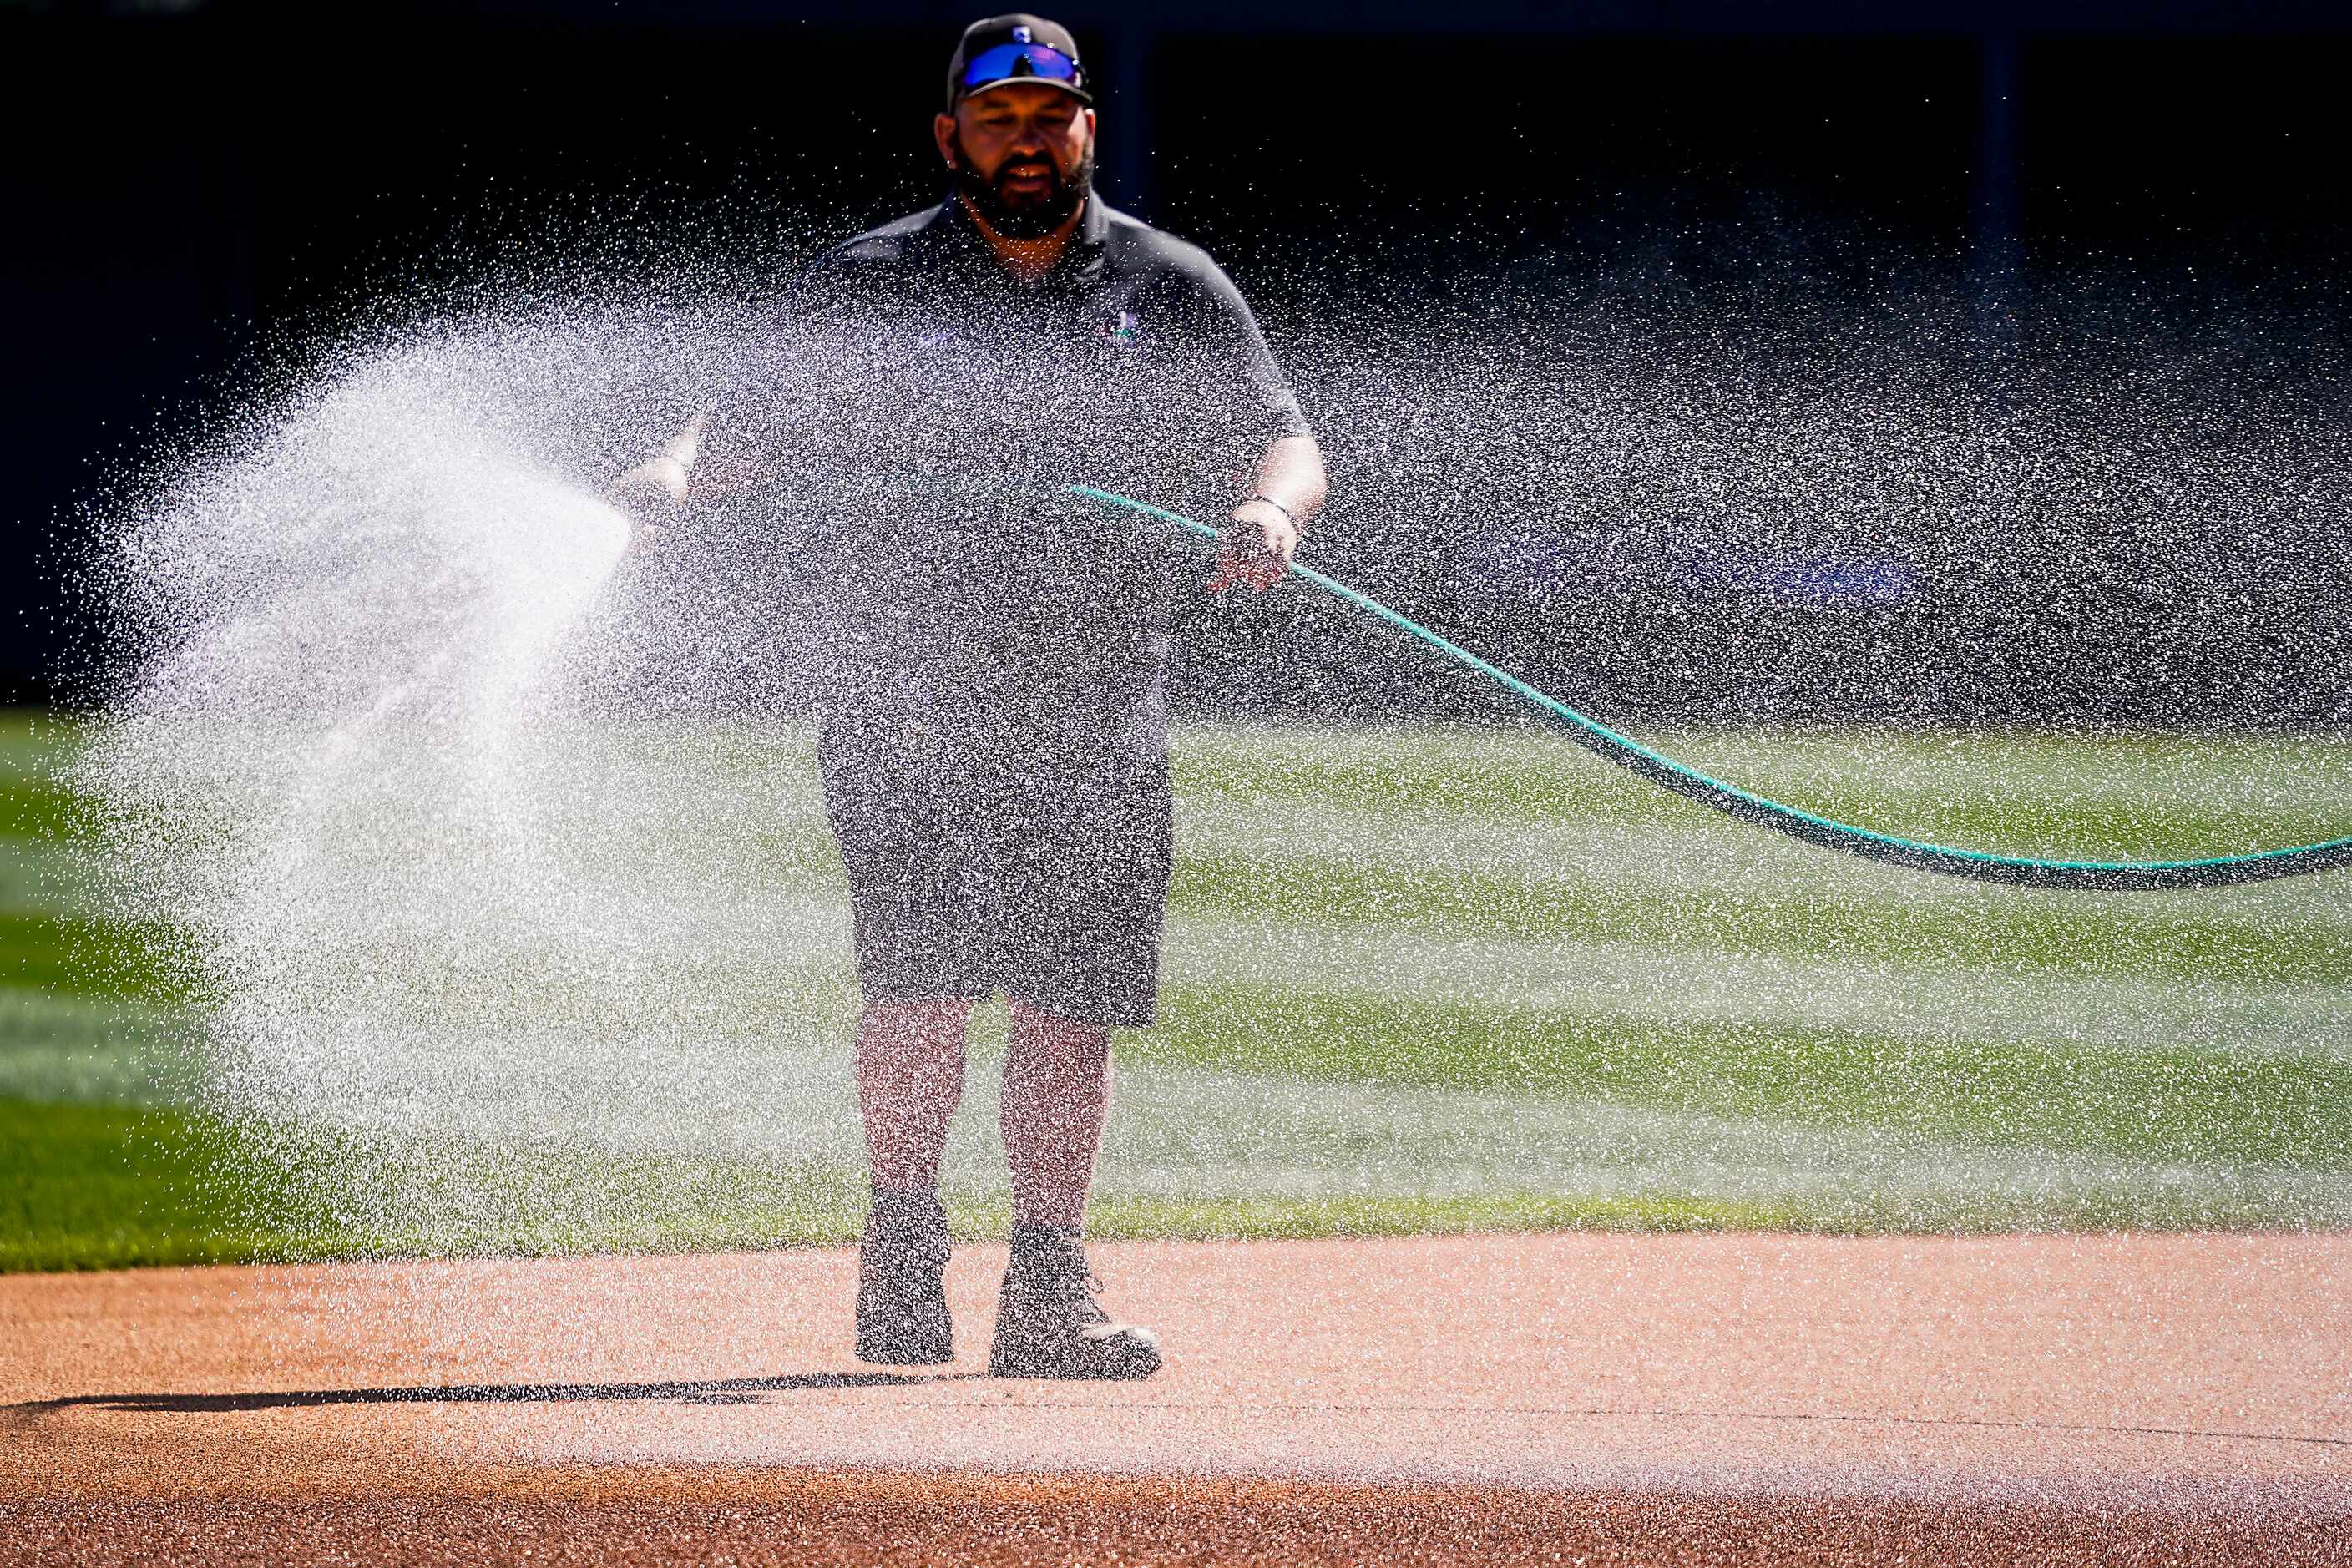 Groundkeepers prepare the field before a spring training game between the Texas Rangers and...